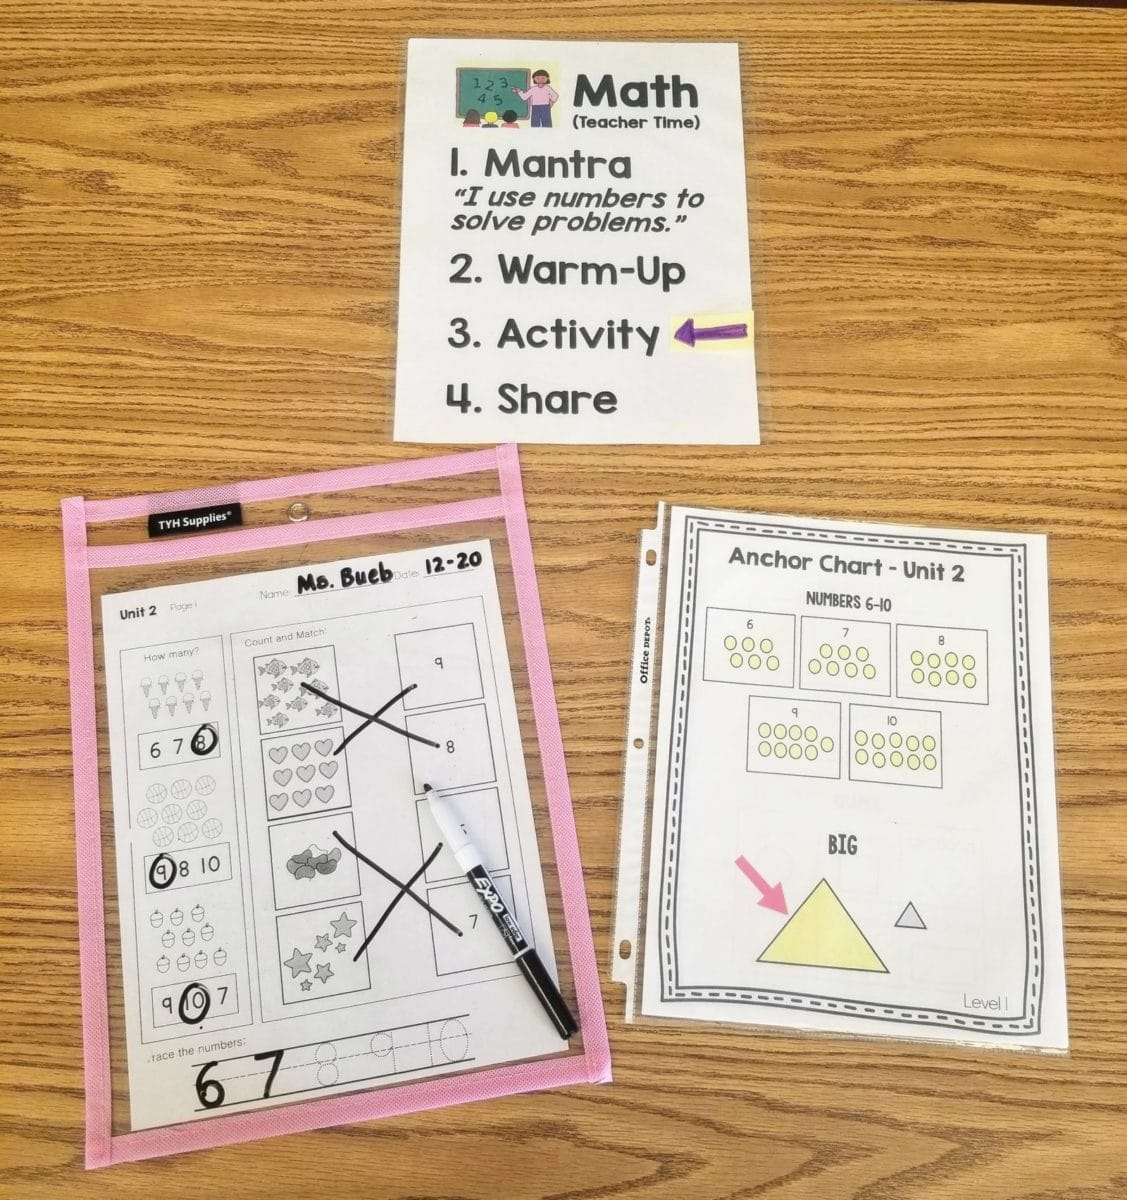 Focus on Five: My Favorite Resources to Teach Math